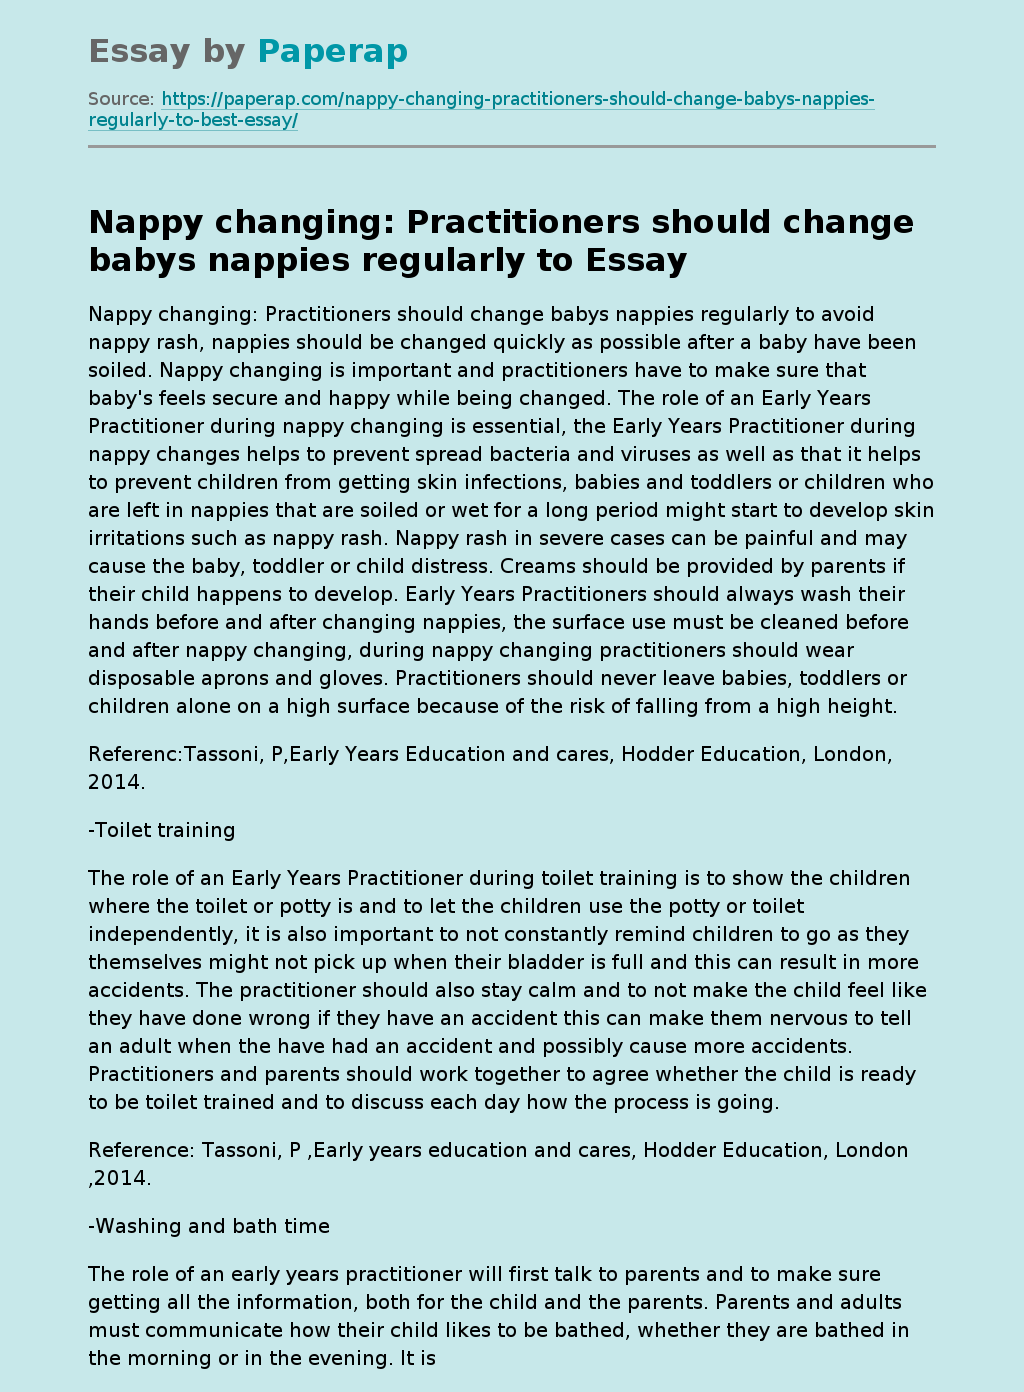 Nappy changing: Practitioners should change babys nappies regularly to